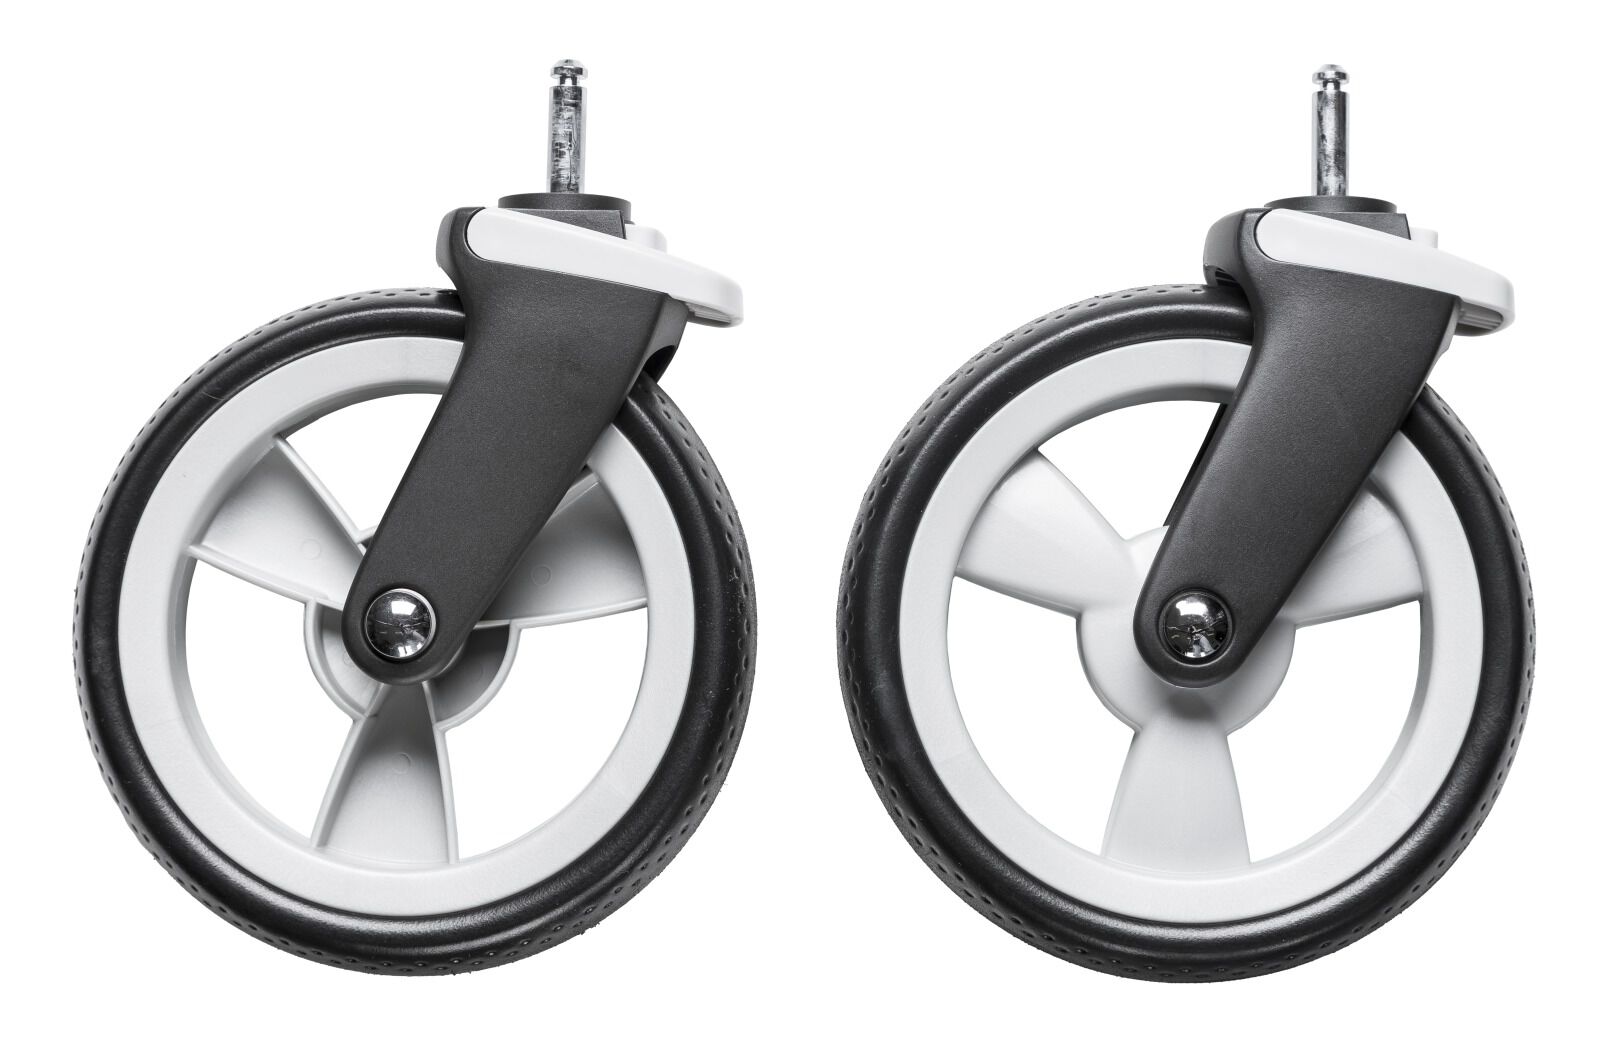 stokke replacement wheels